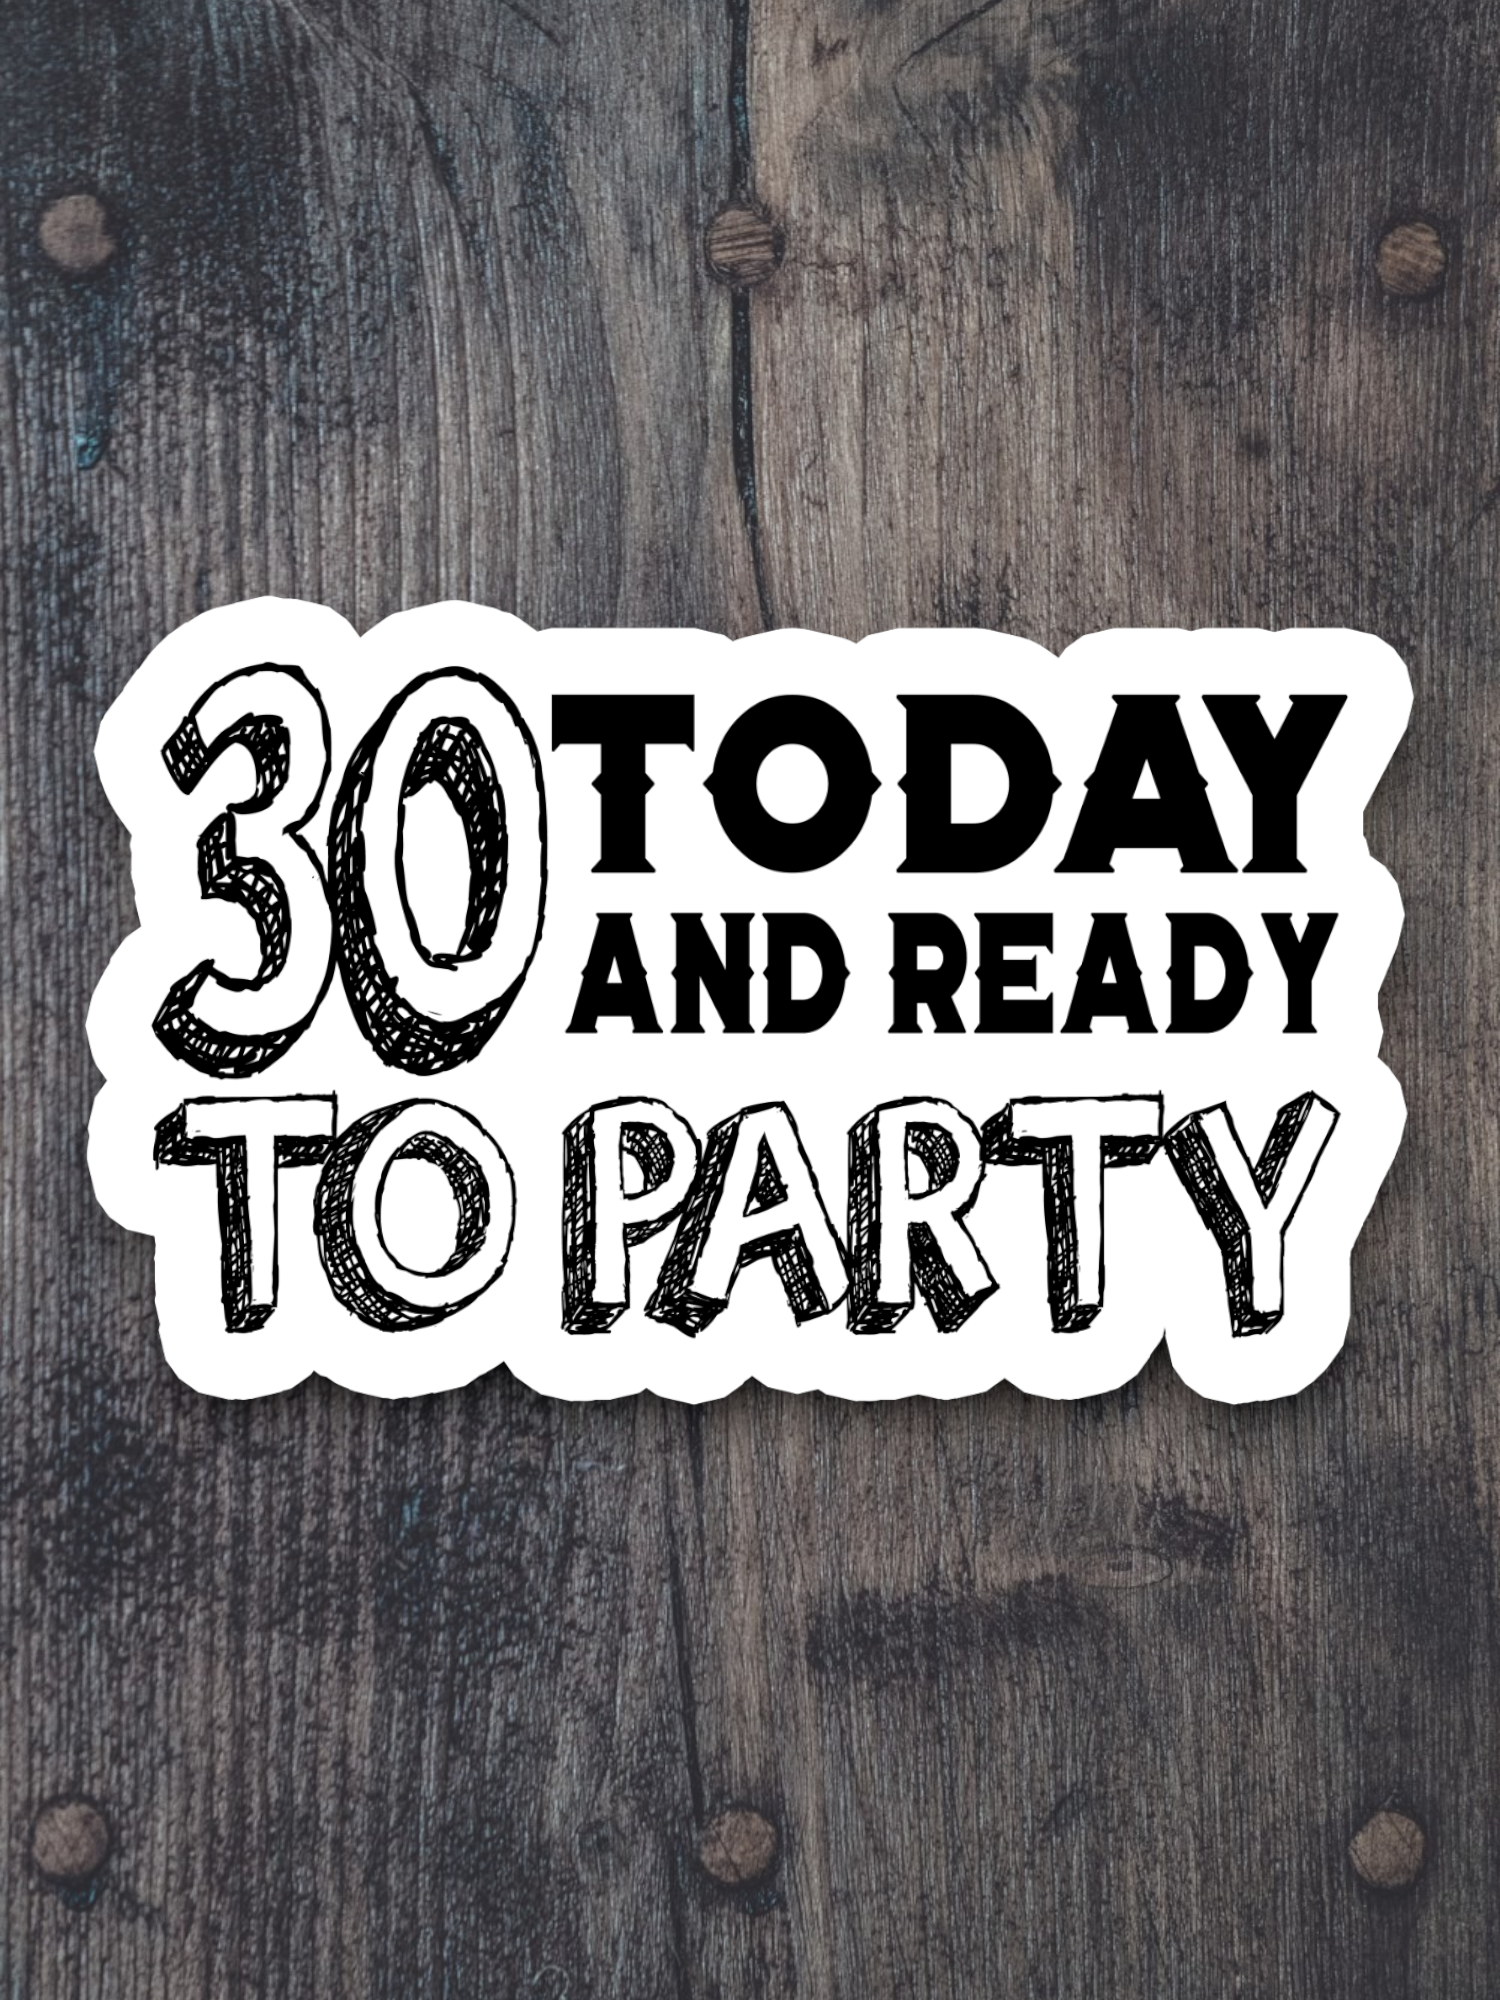 30 Today and Ready to Party Sticker